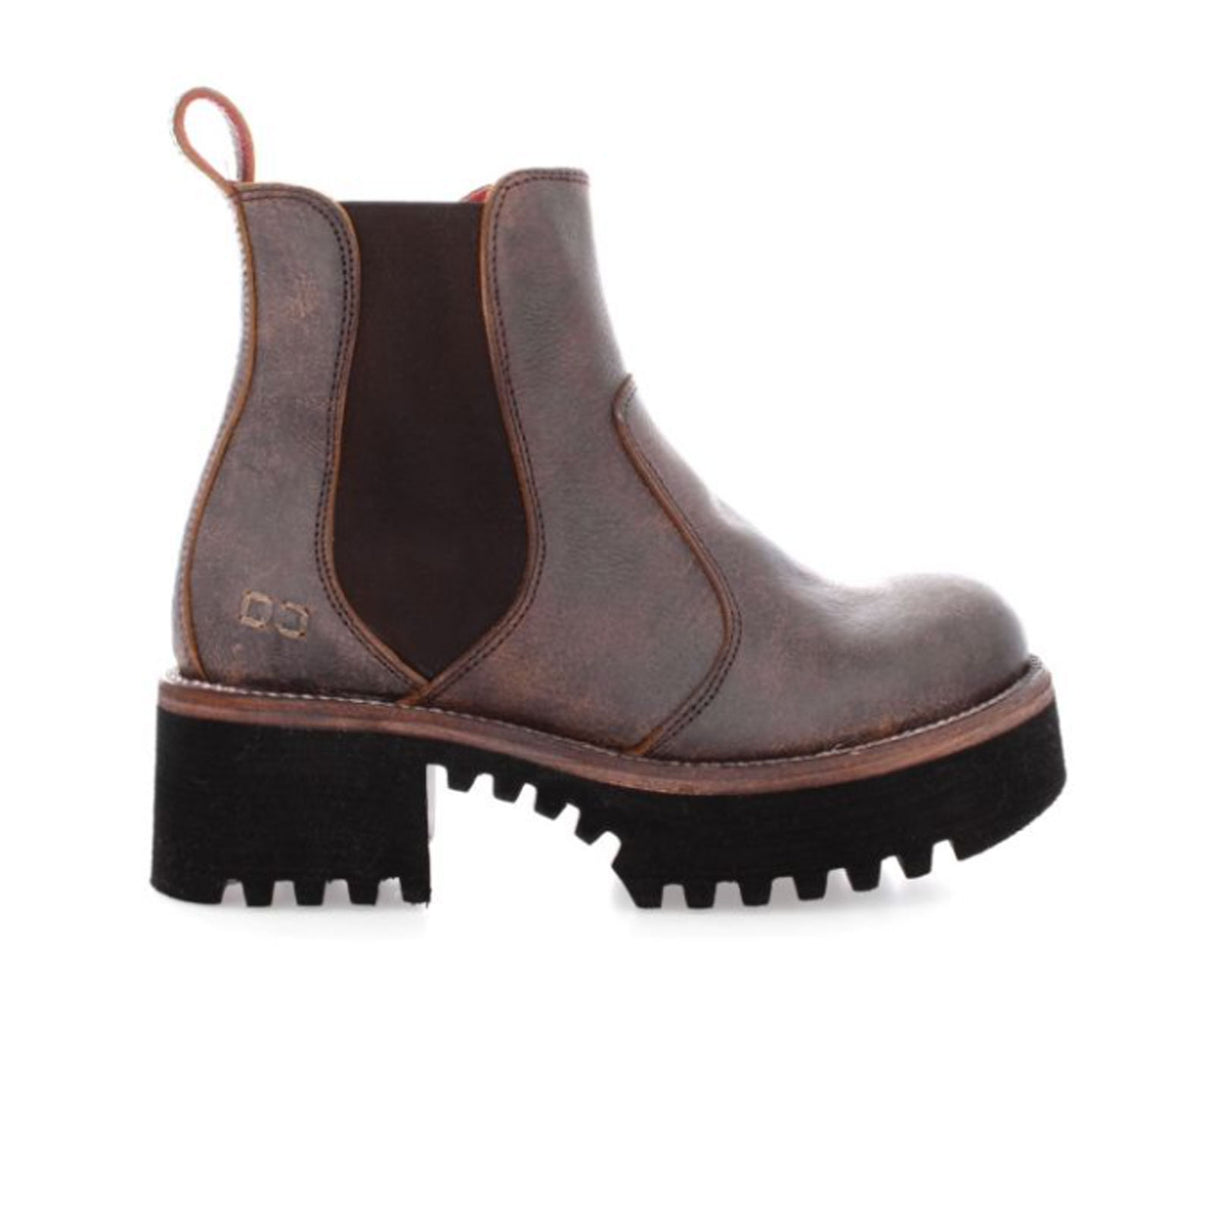 Bed Stu Valda Hi Chelsea Boot (Women) - TDM Lux Boots - Fashion - Mid Boot - The Heel Shoe Fitters